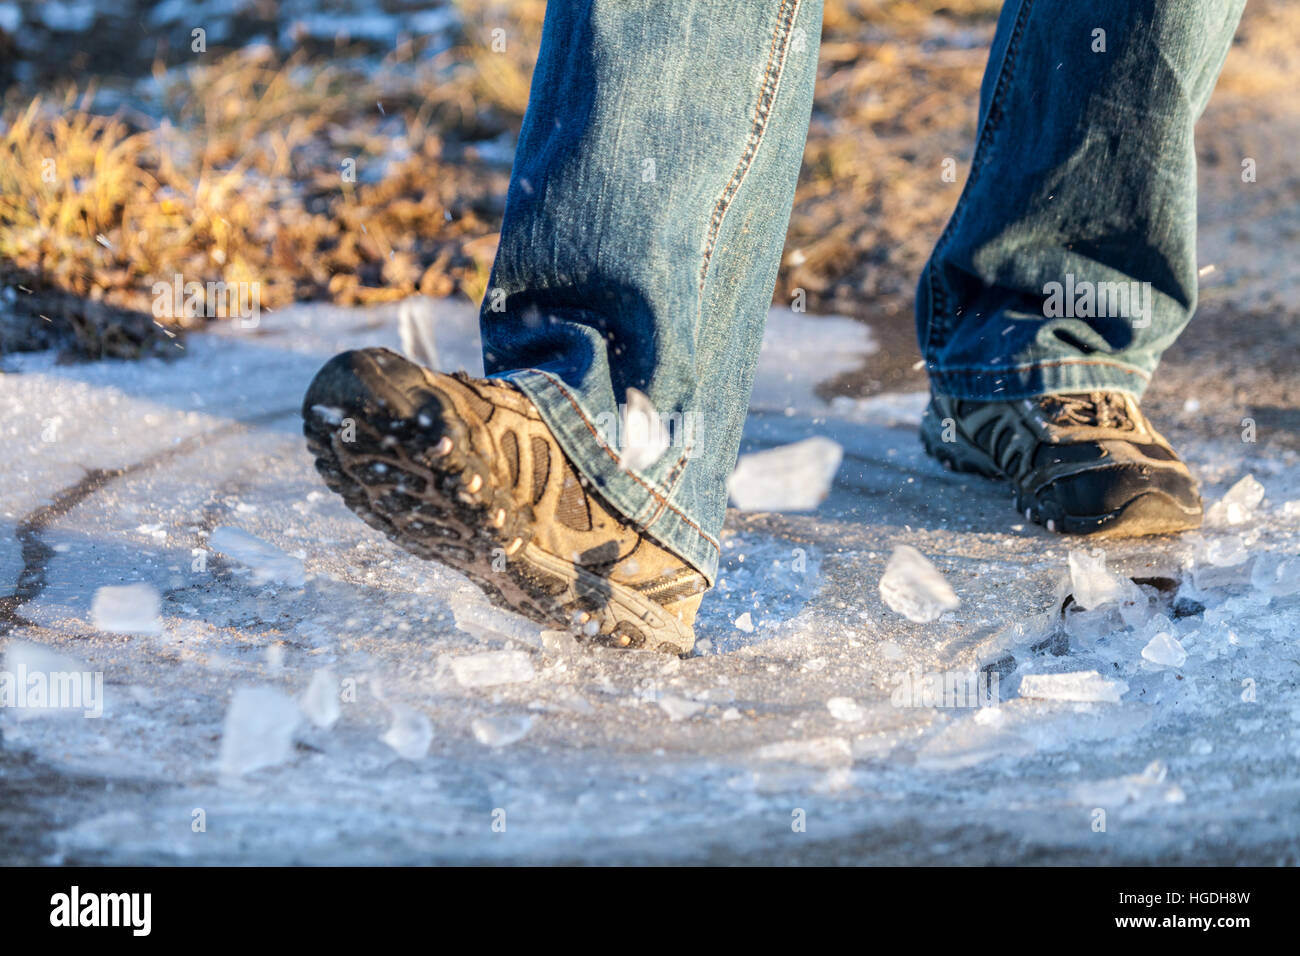 human goes on a dangerous ice area Stock Photo